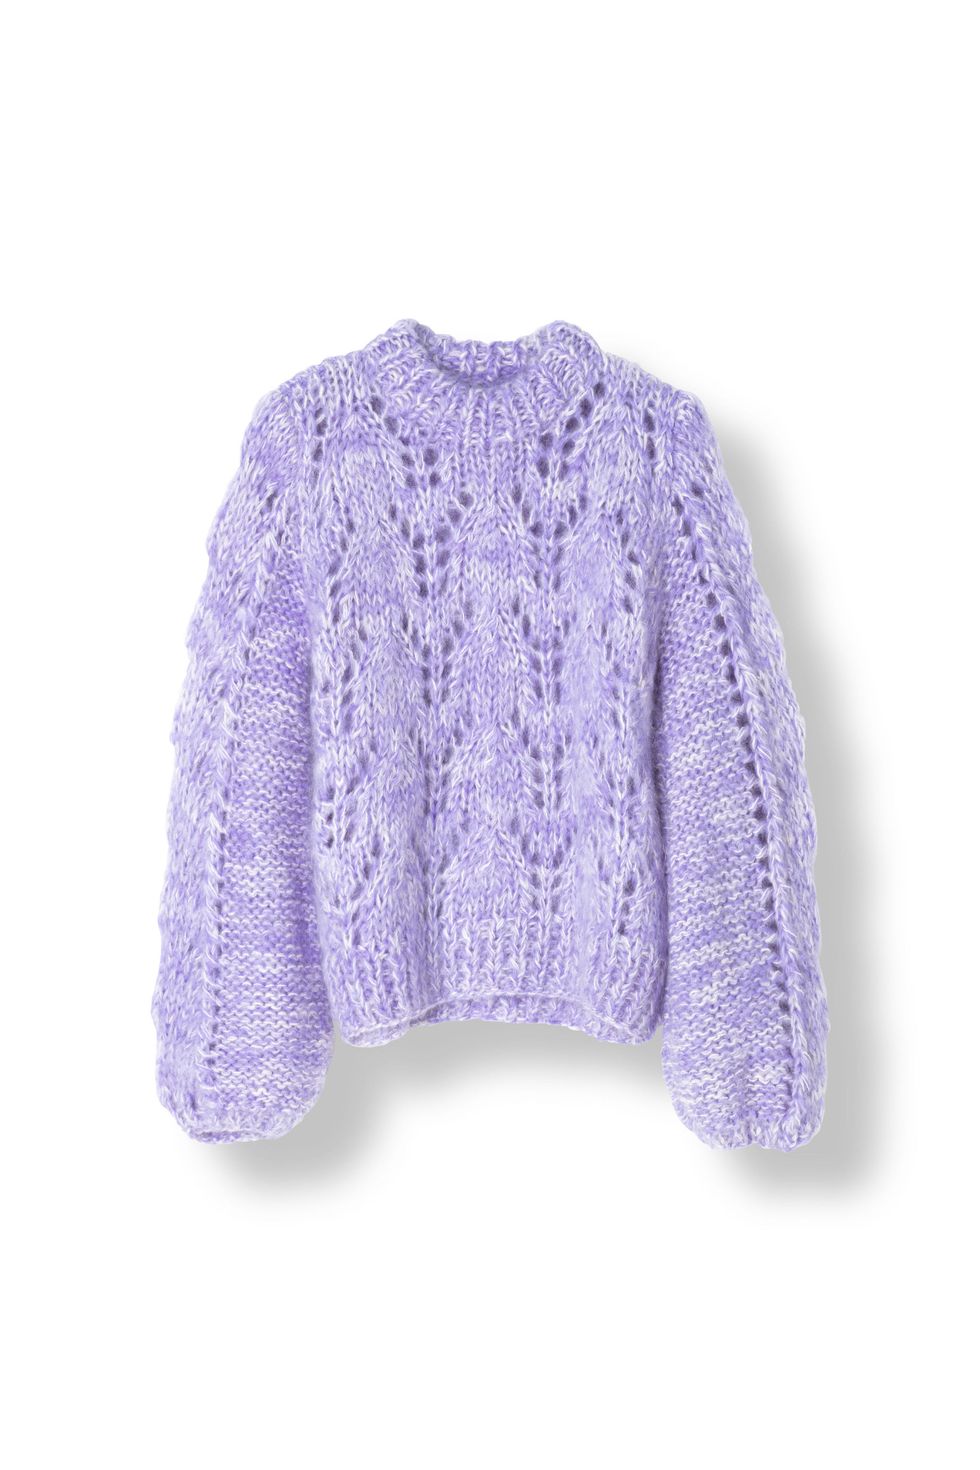 Clothing, Violet, Purple, Outerwear, Lilac, Lavender, Sleeve, Sweater, Cardigan, Blouse, 